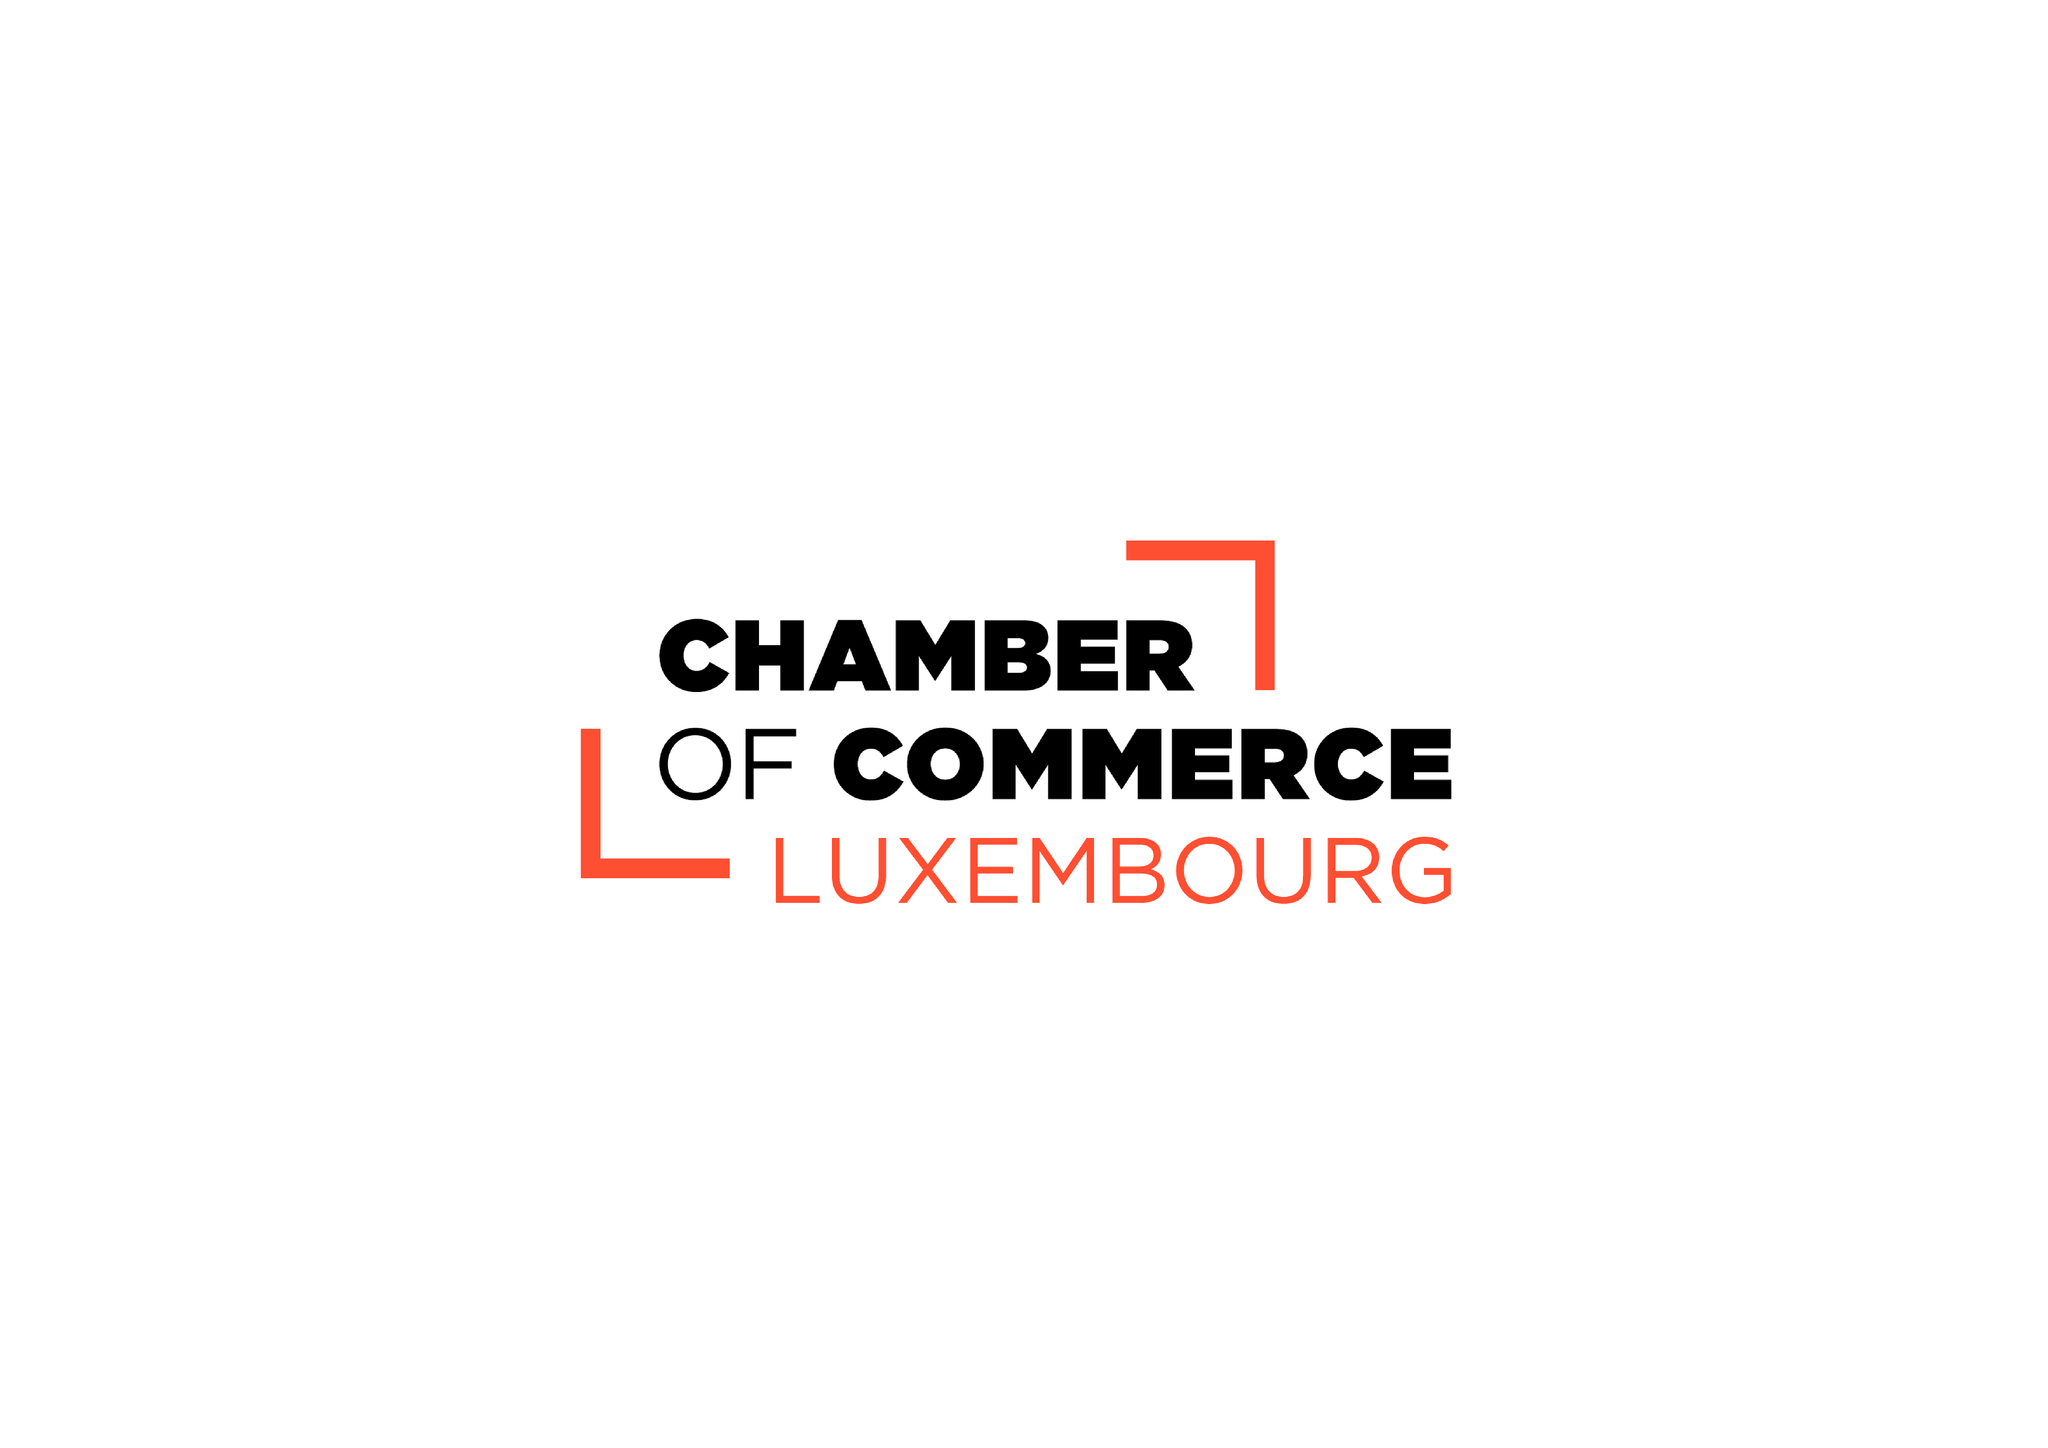 Chamber of Commerce of Luxembourg